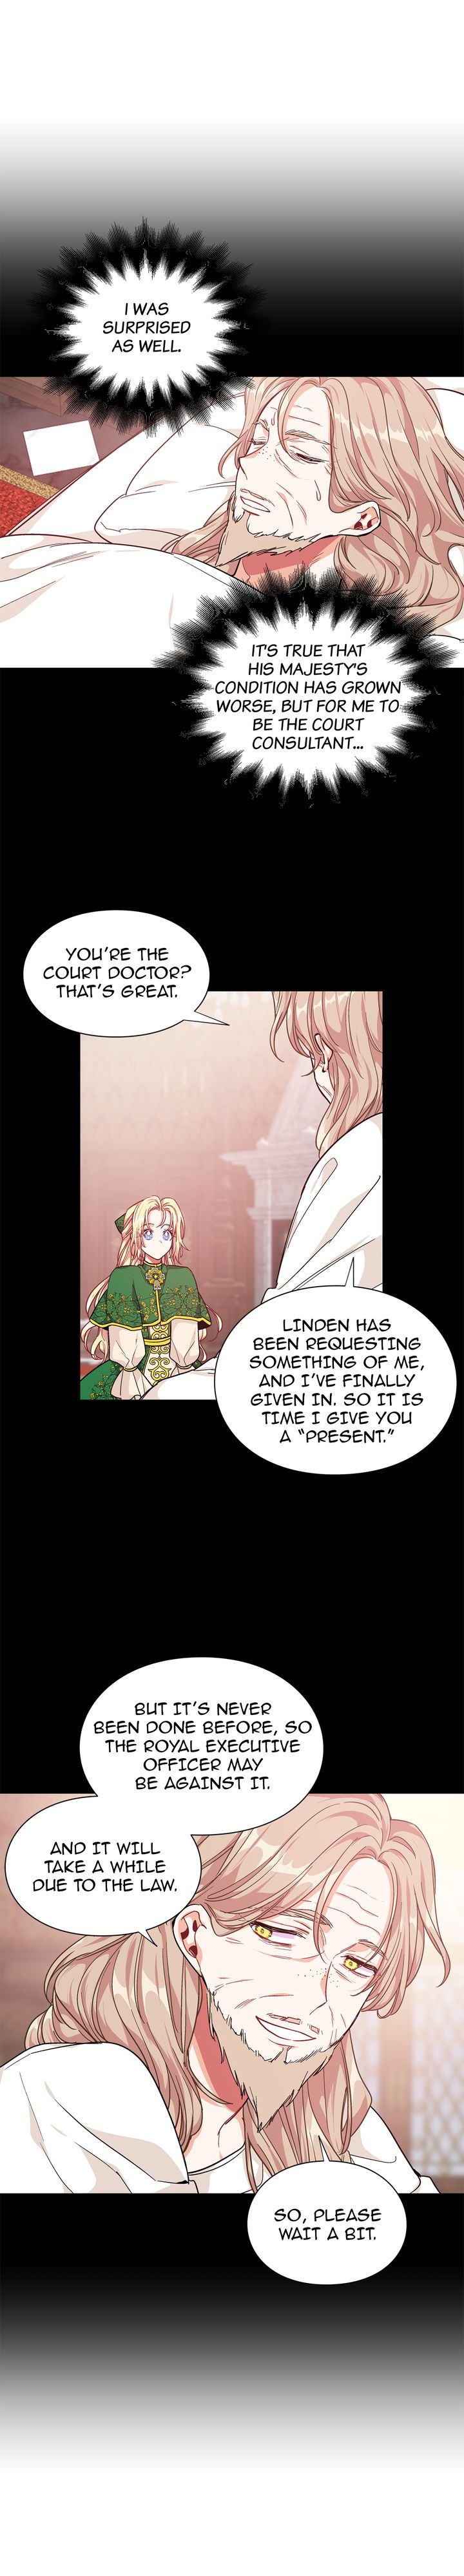 Doctor Elise - The Royal Lady with the Lamp - Chapter 91 Page 15